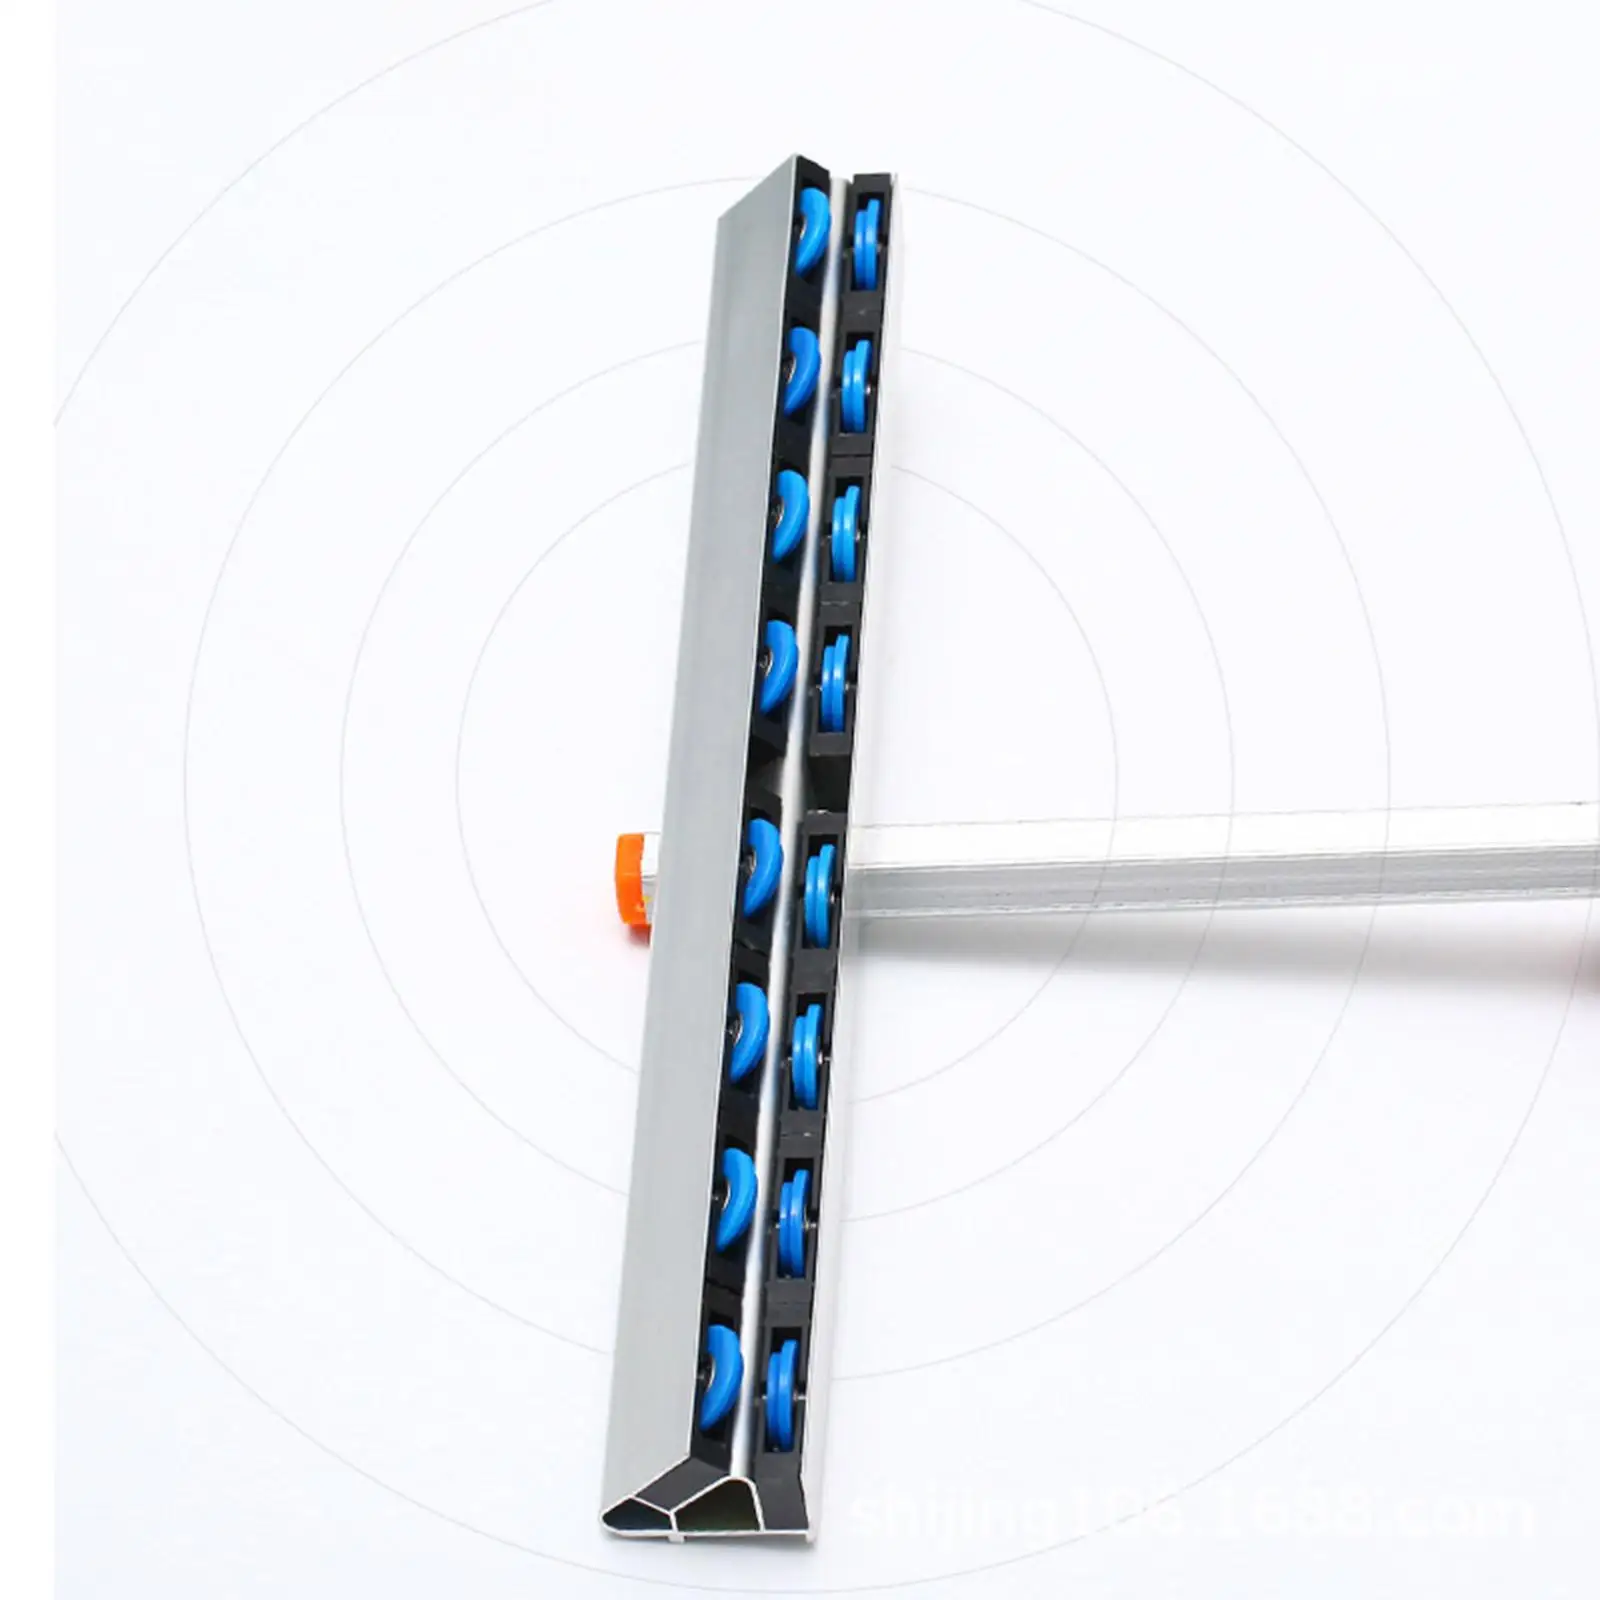 Glass Strip Cutter DIY Cutting Breaking Comfortable Gripping 63cm Length with Blades T Shaped Tile Cutter Tool for Ceramic Tile